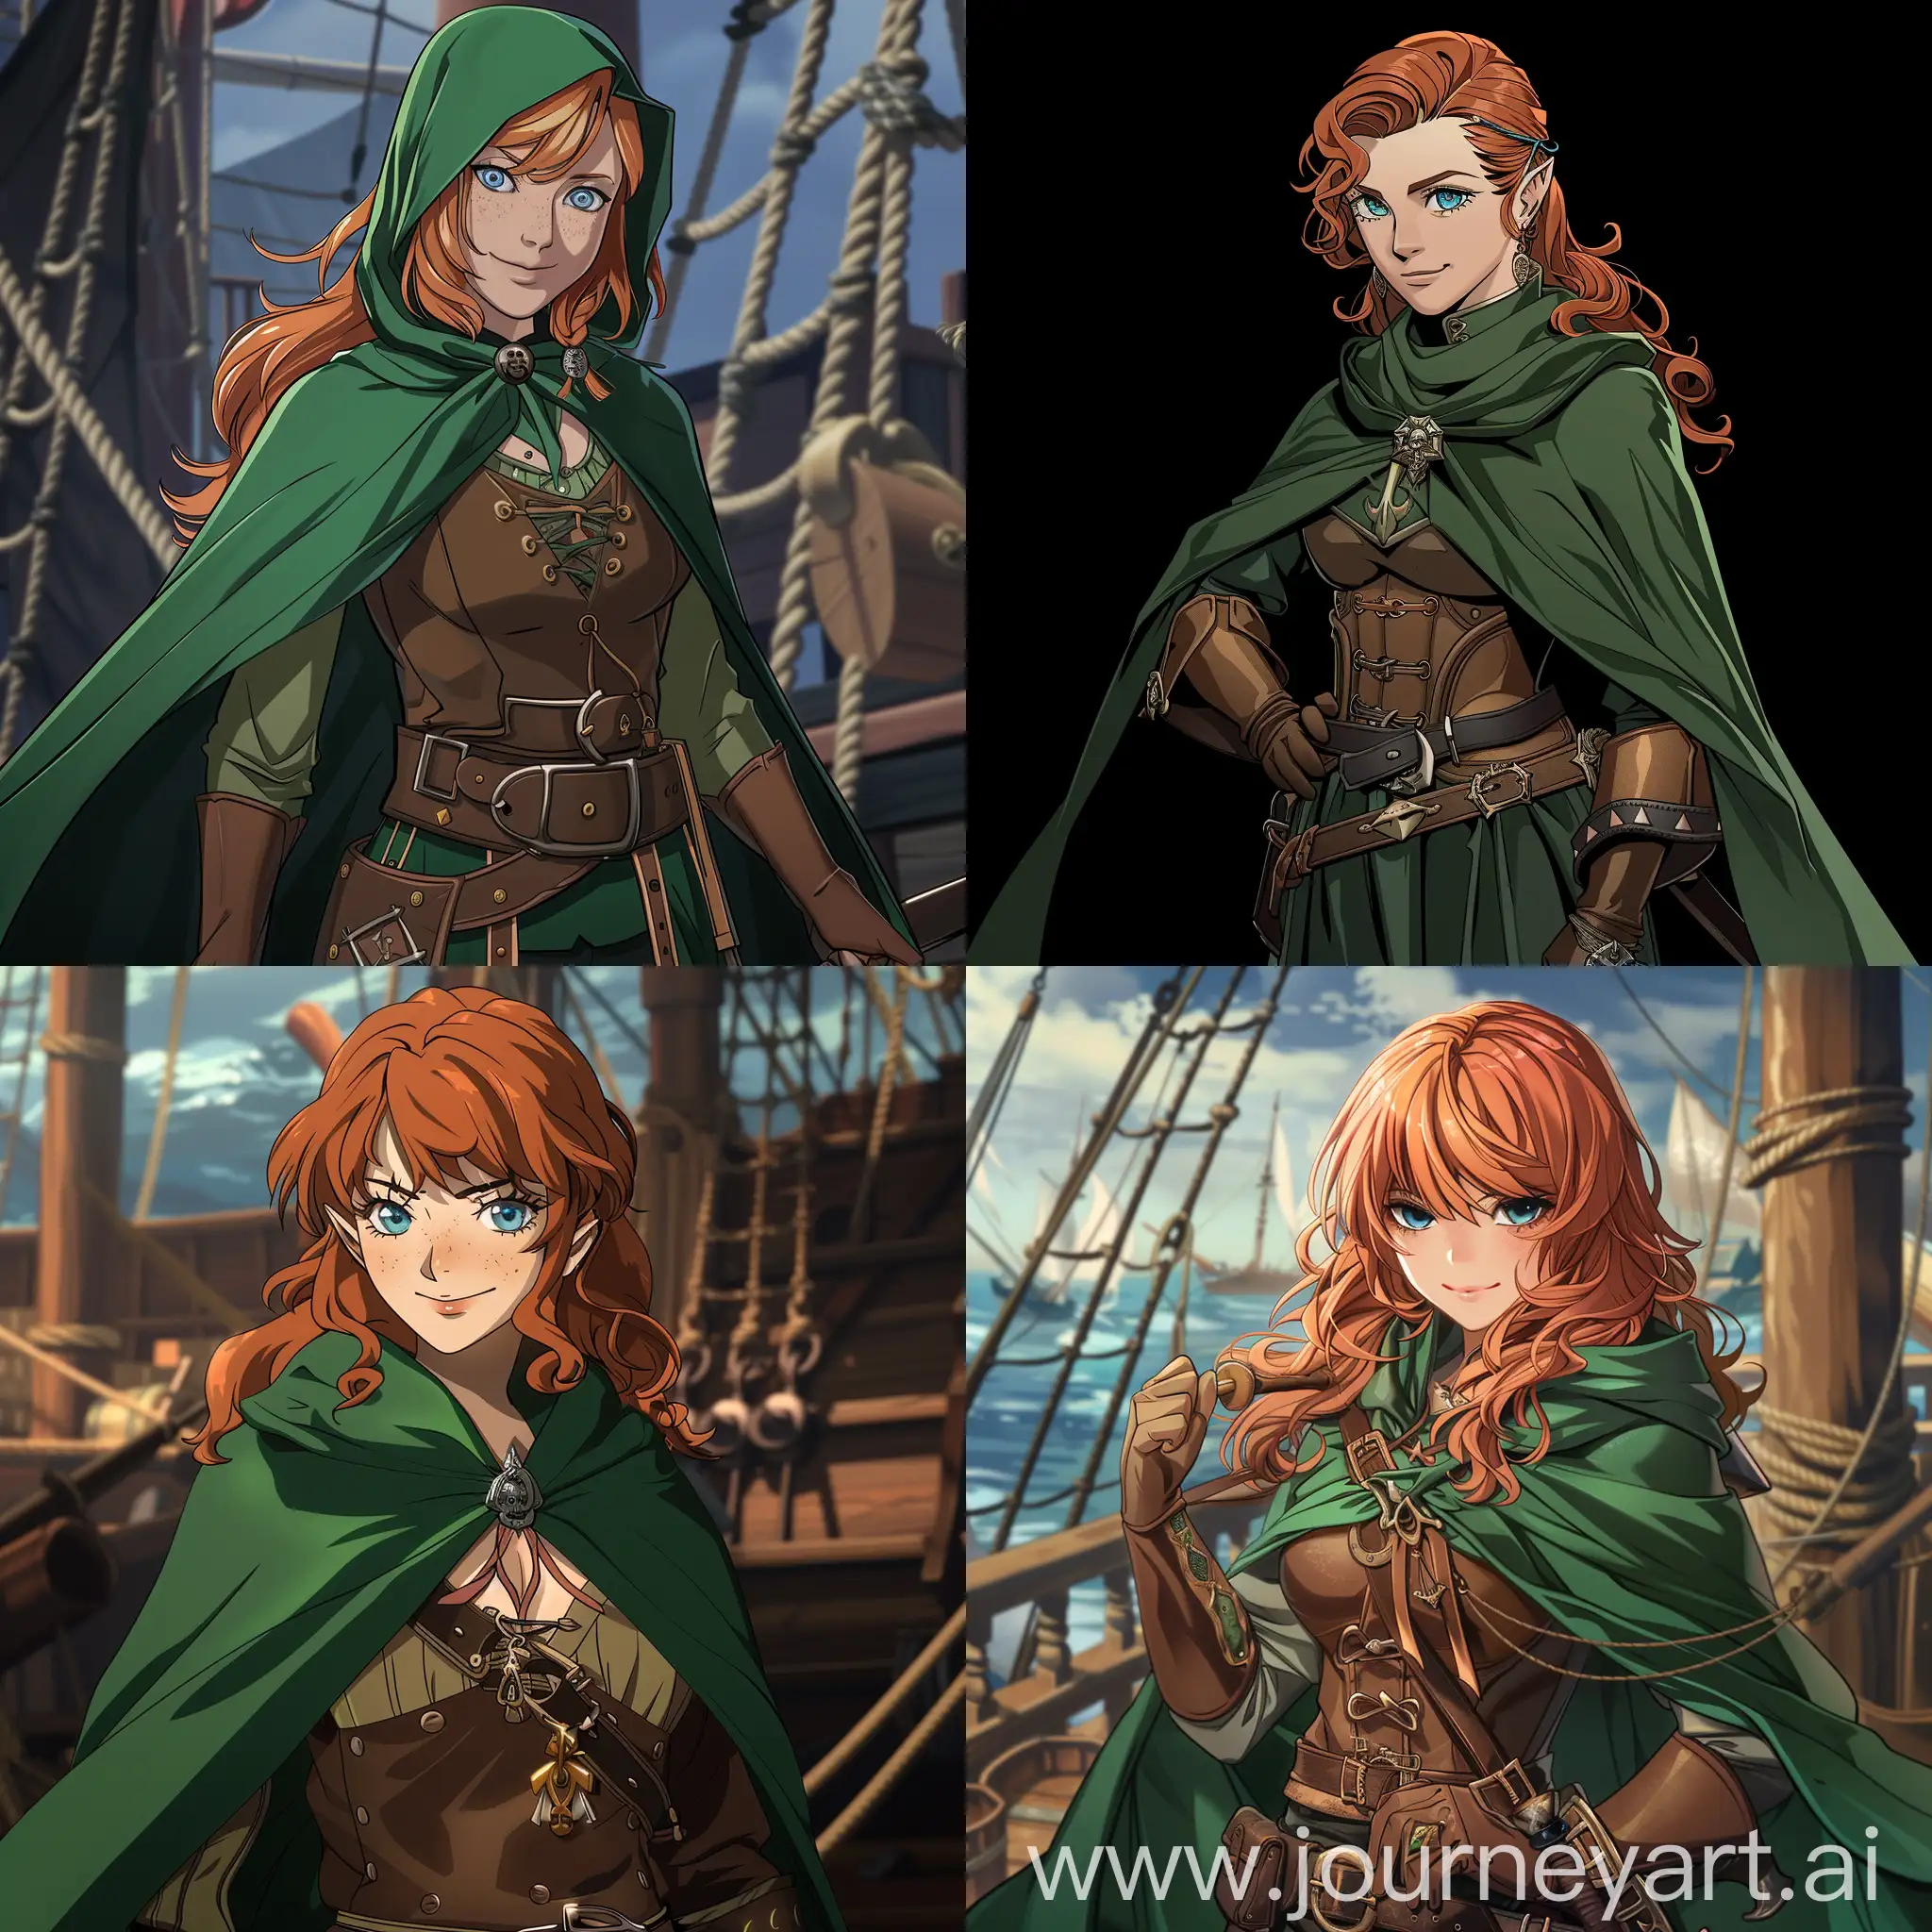 2D anime graphics, the Pirate Queen Grace O'Malley. Clad in a green cloak and leather armor, she exudes a regal aura. Her copper hair and piercing blue eyes reflect a life of naval conquest. With a cutlass at her side, she greets Luvia with a knowing smile, ready to join forces in the Holy Grail War.